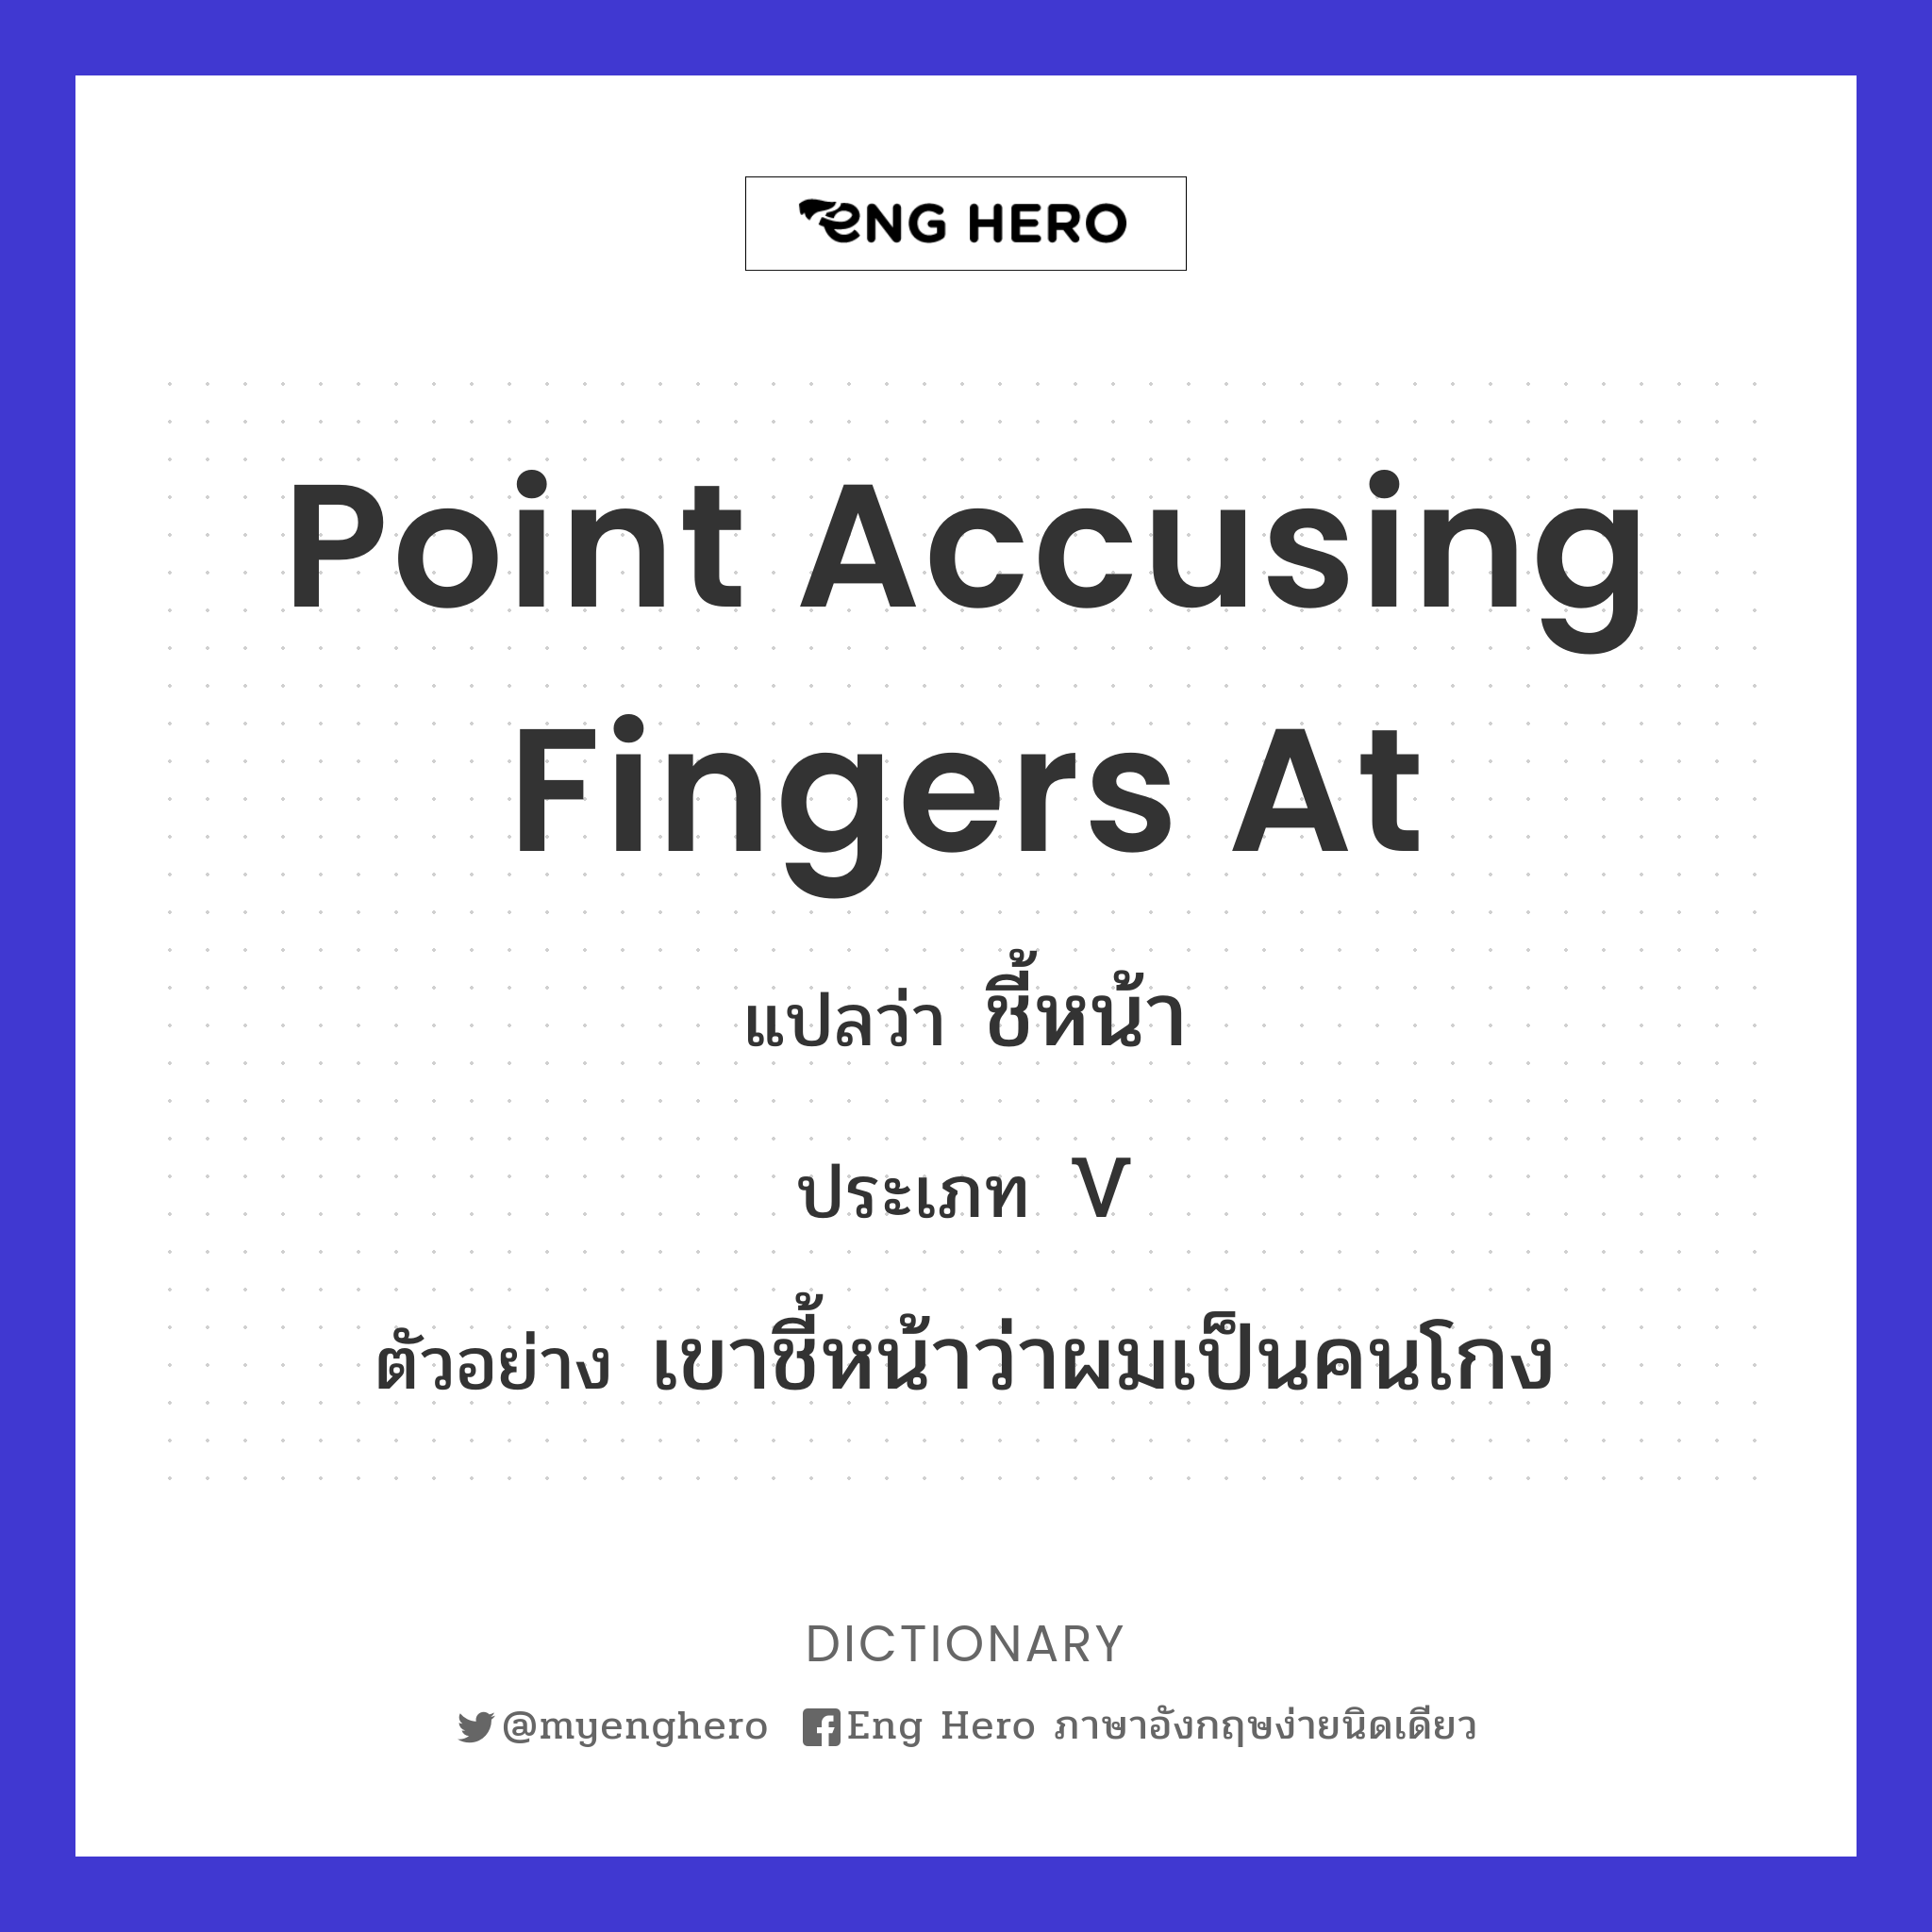 point accusing fingers at